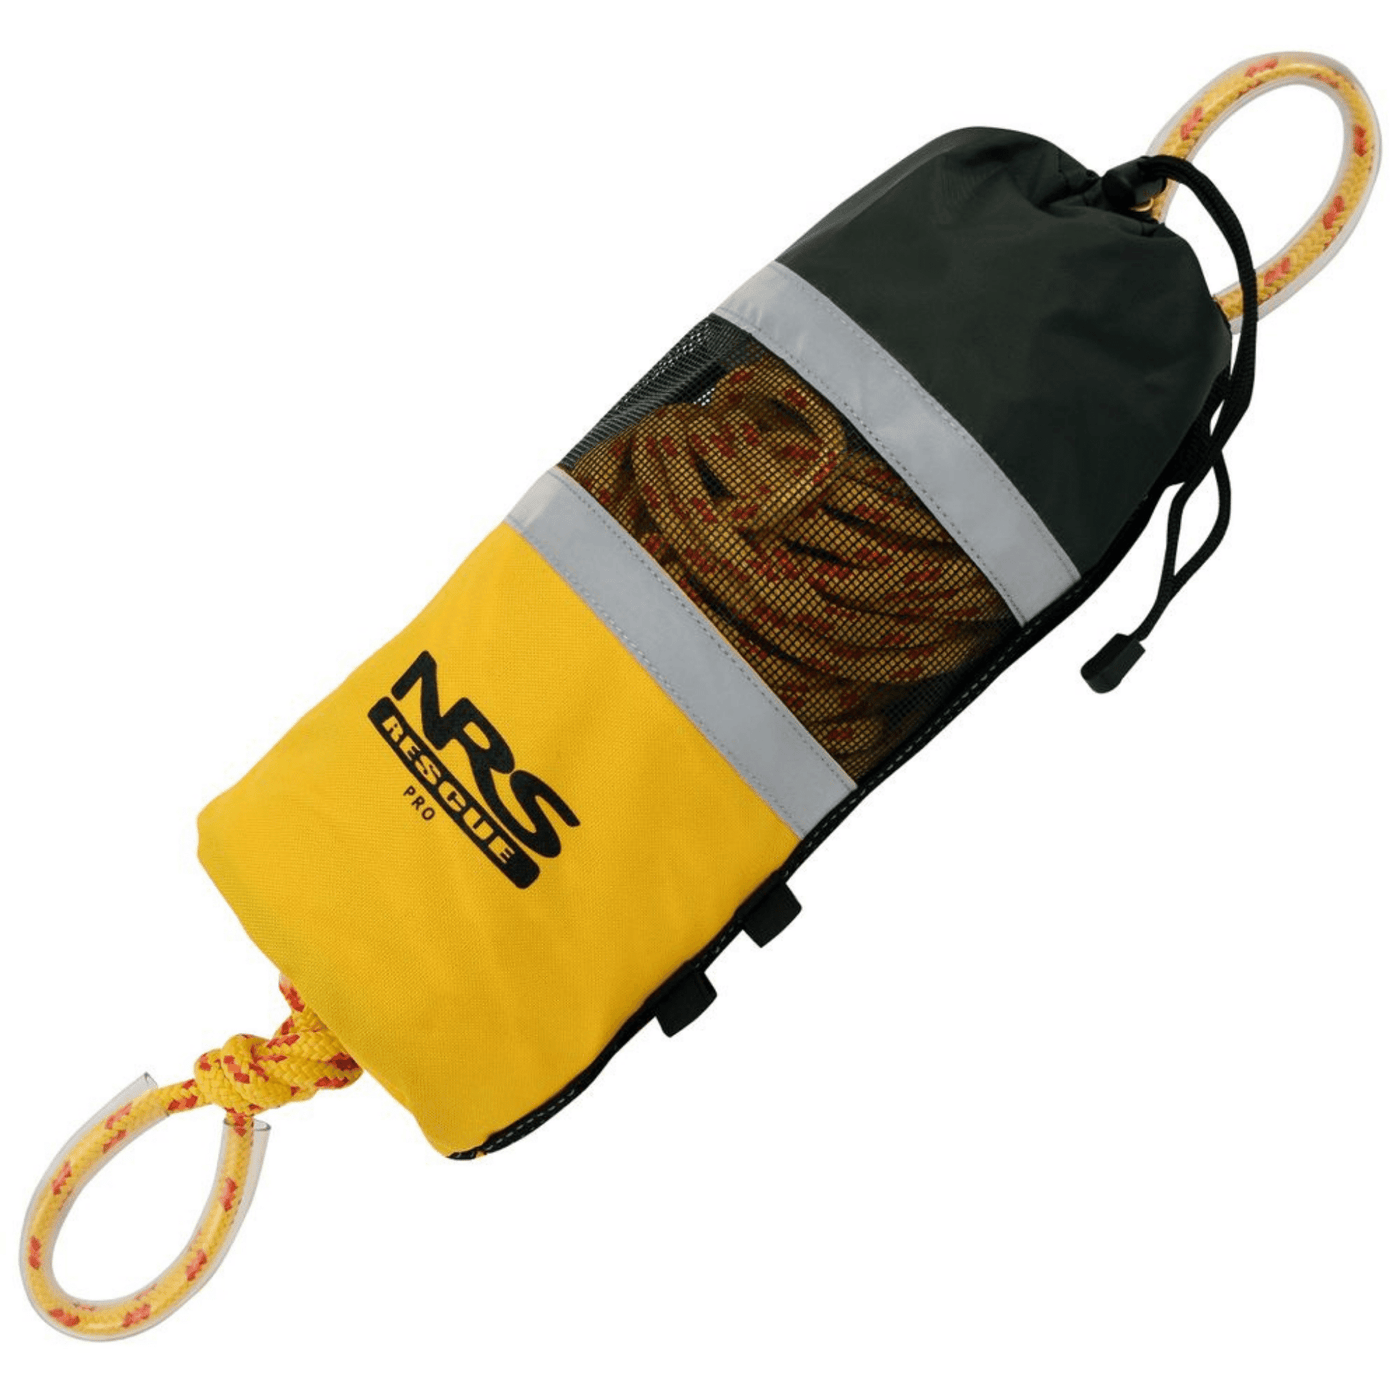 NRS Pro Rescue Throw Bag - 23M | Kayak Safety Gear | Further Faster Christchurch NZ